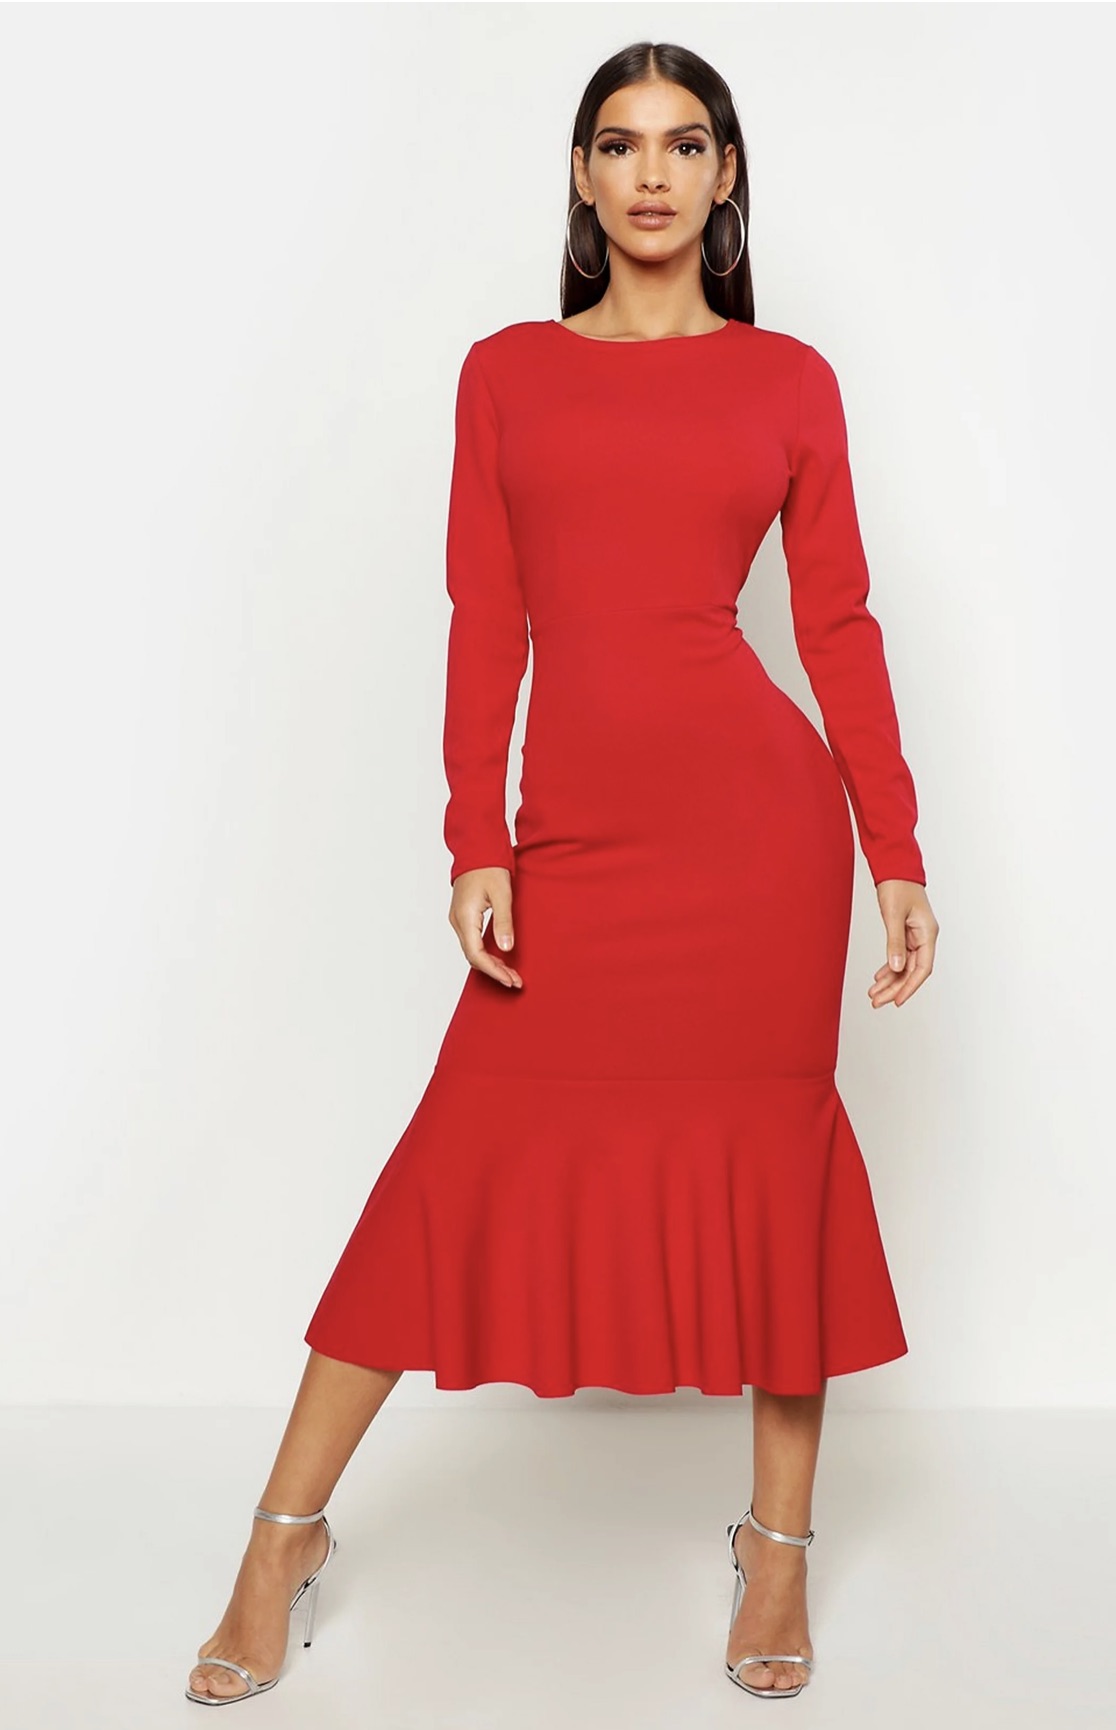 20 Modest Dresses for Women: Easter Fashion to get - Lifewithbisi